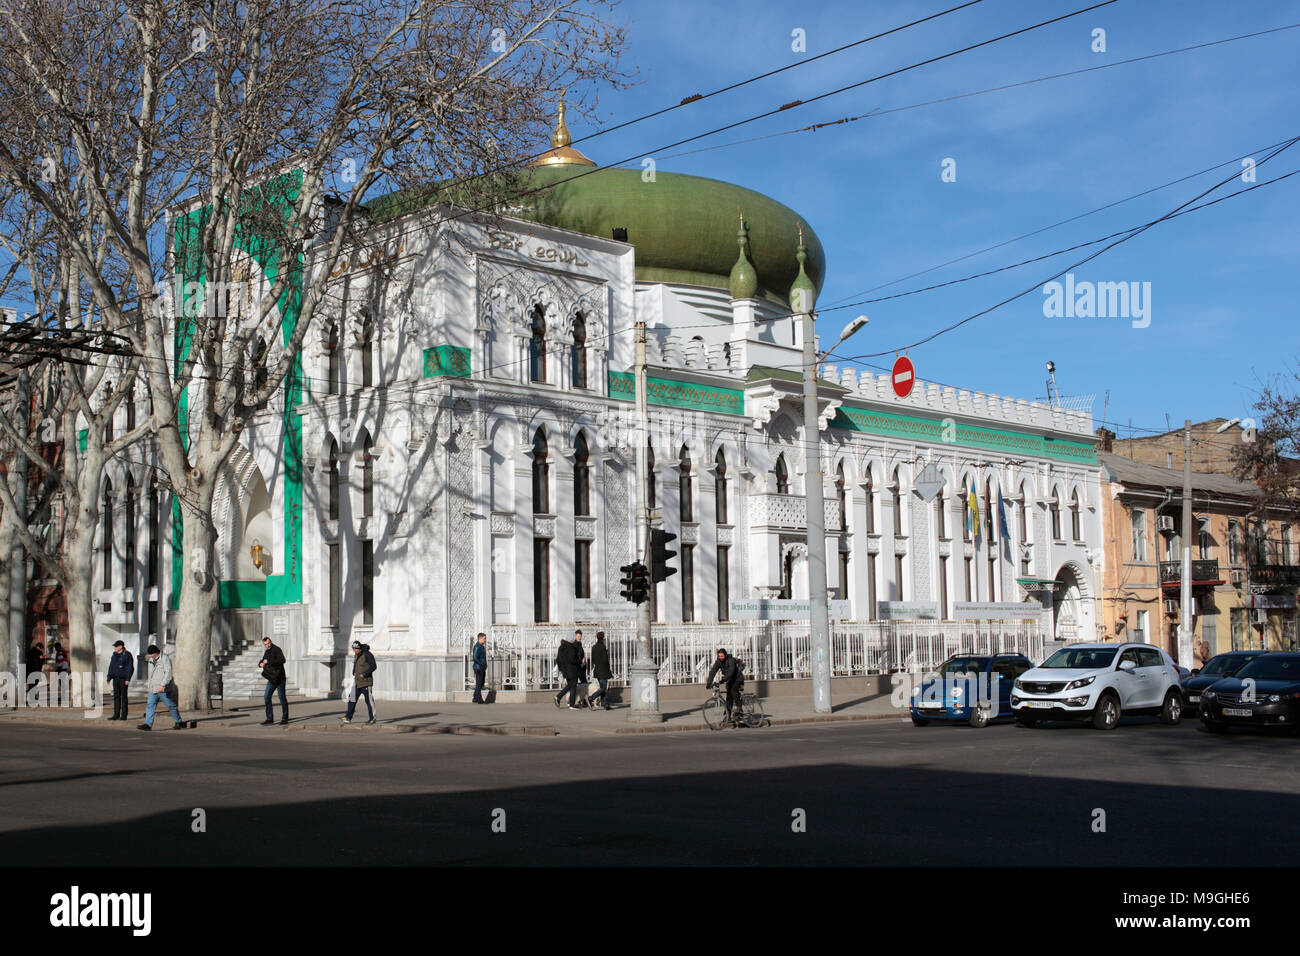 Odessa, Ukraine - March 25, 2015: People near the Al-Salam Mosque and Arabian Cultural Center. The cultural center and mosque were opened in June 2001 Stock Photo